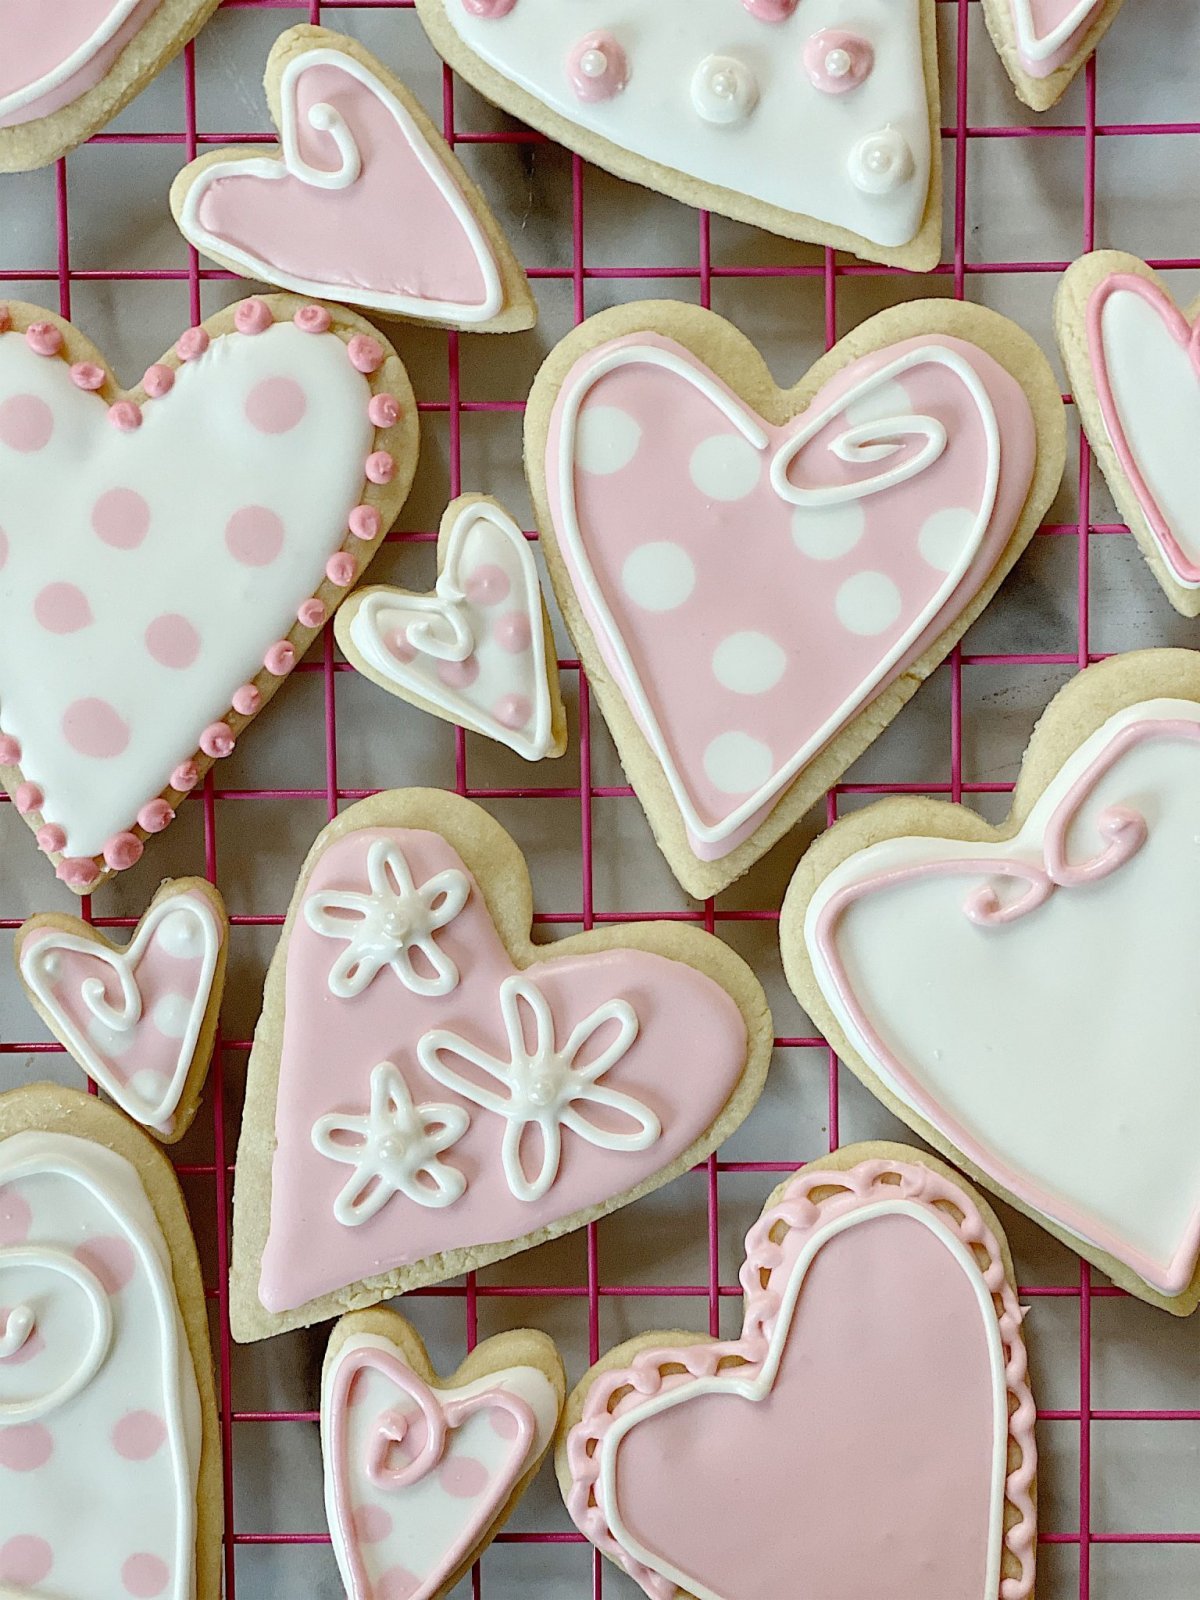 Decorating Cookies 101 with Wilton Royal Icing - MY 100 YEAR OLD HOME